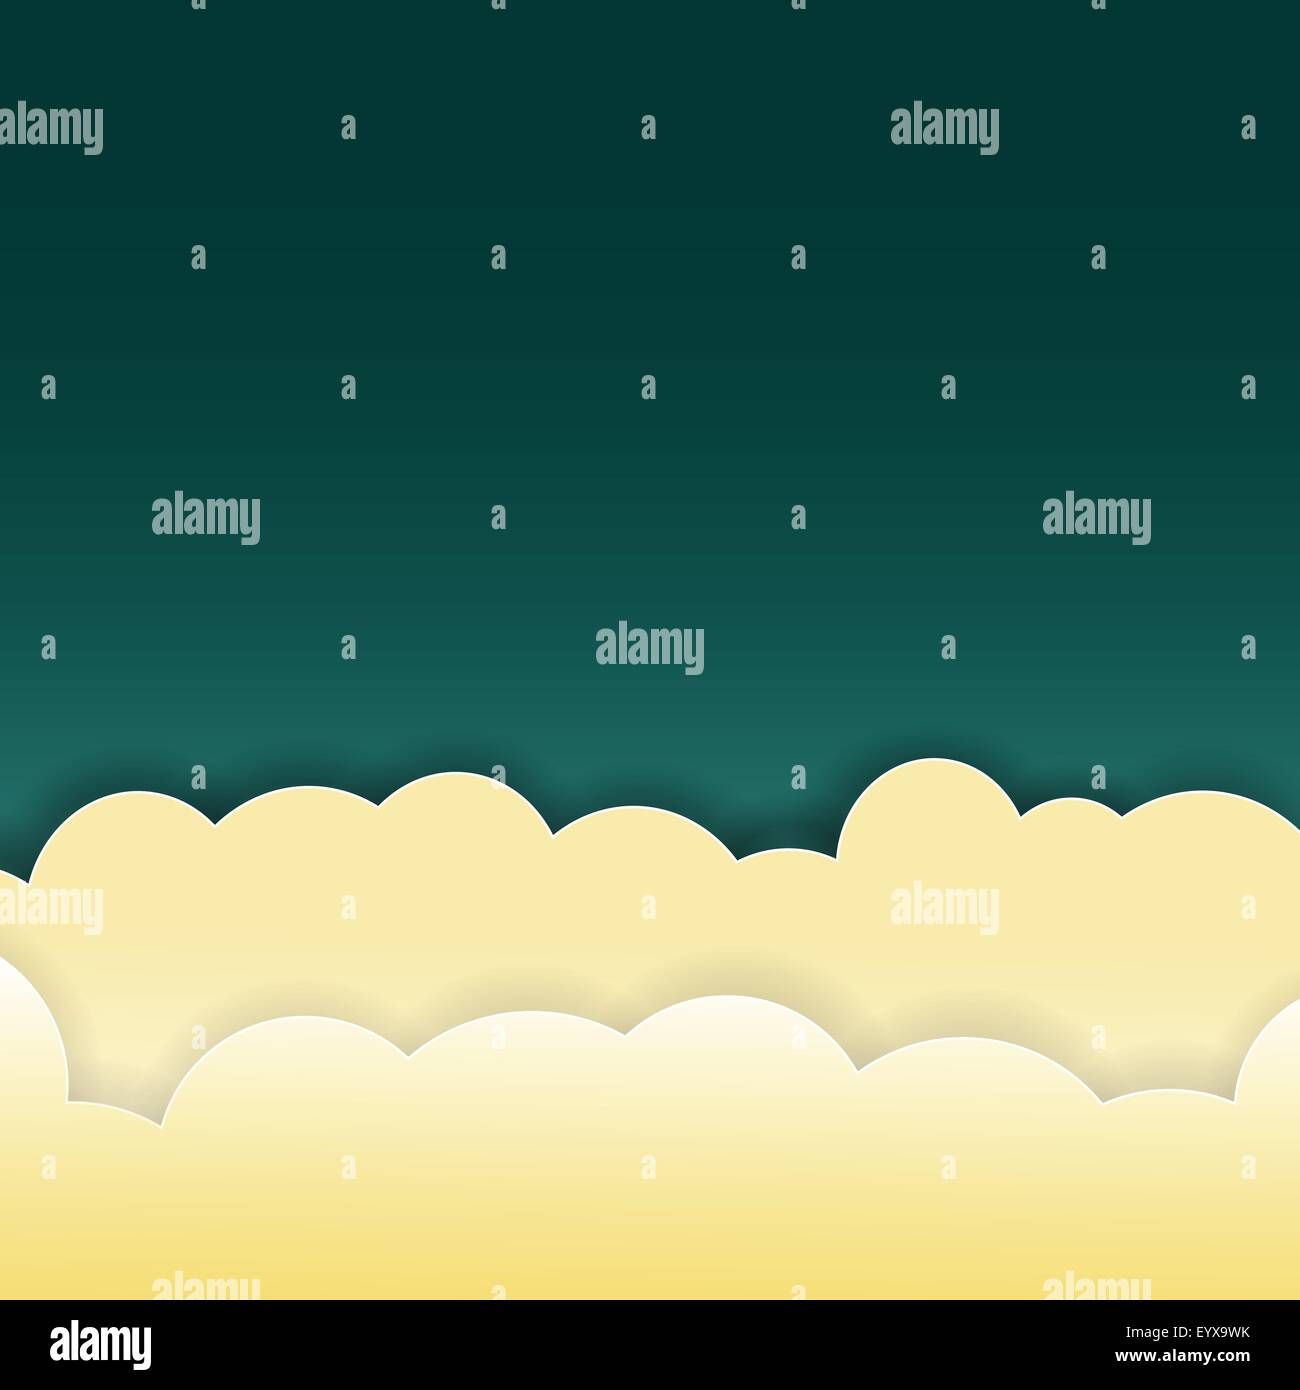 Abstract yellow clouds on dark background vector illustration with place for text. Stock Vector